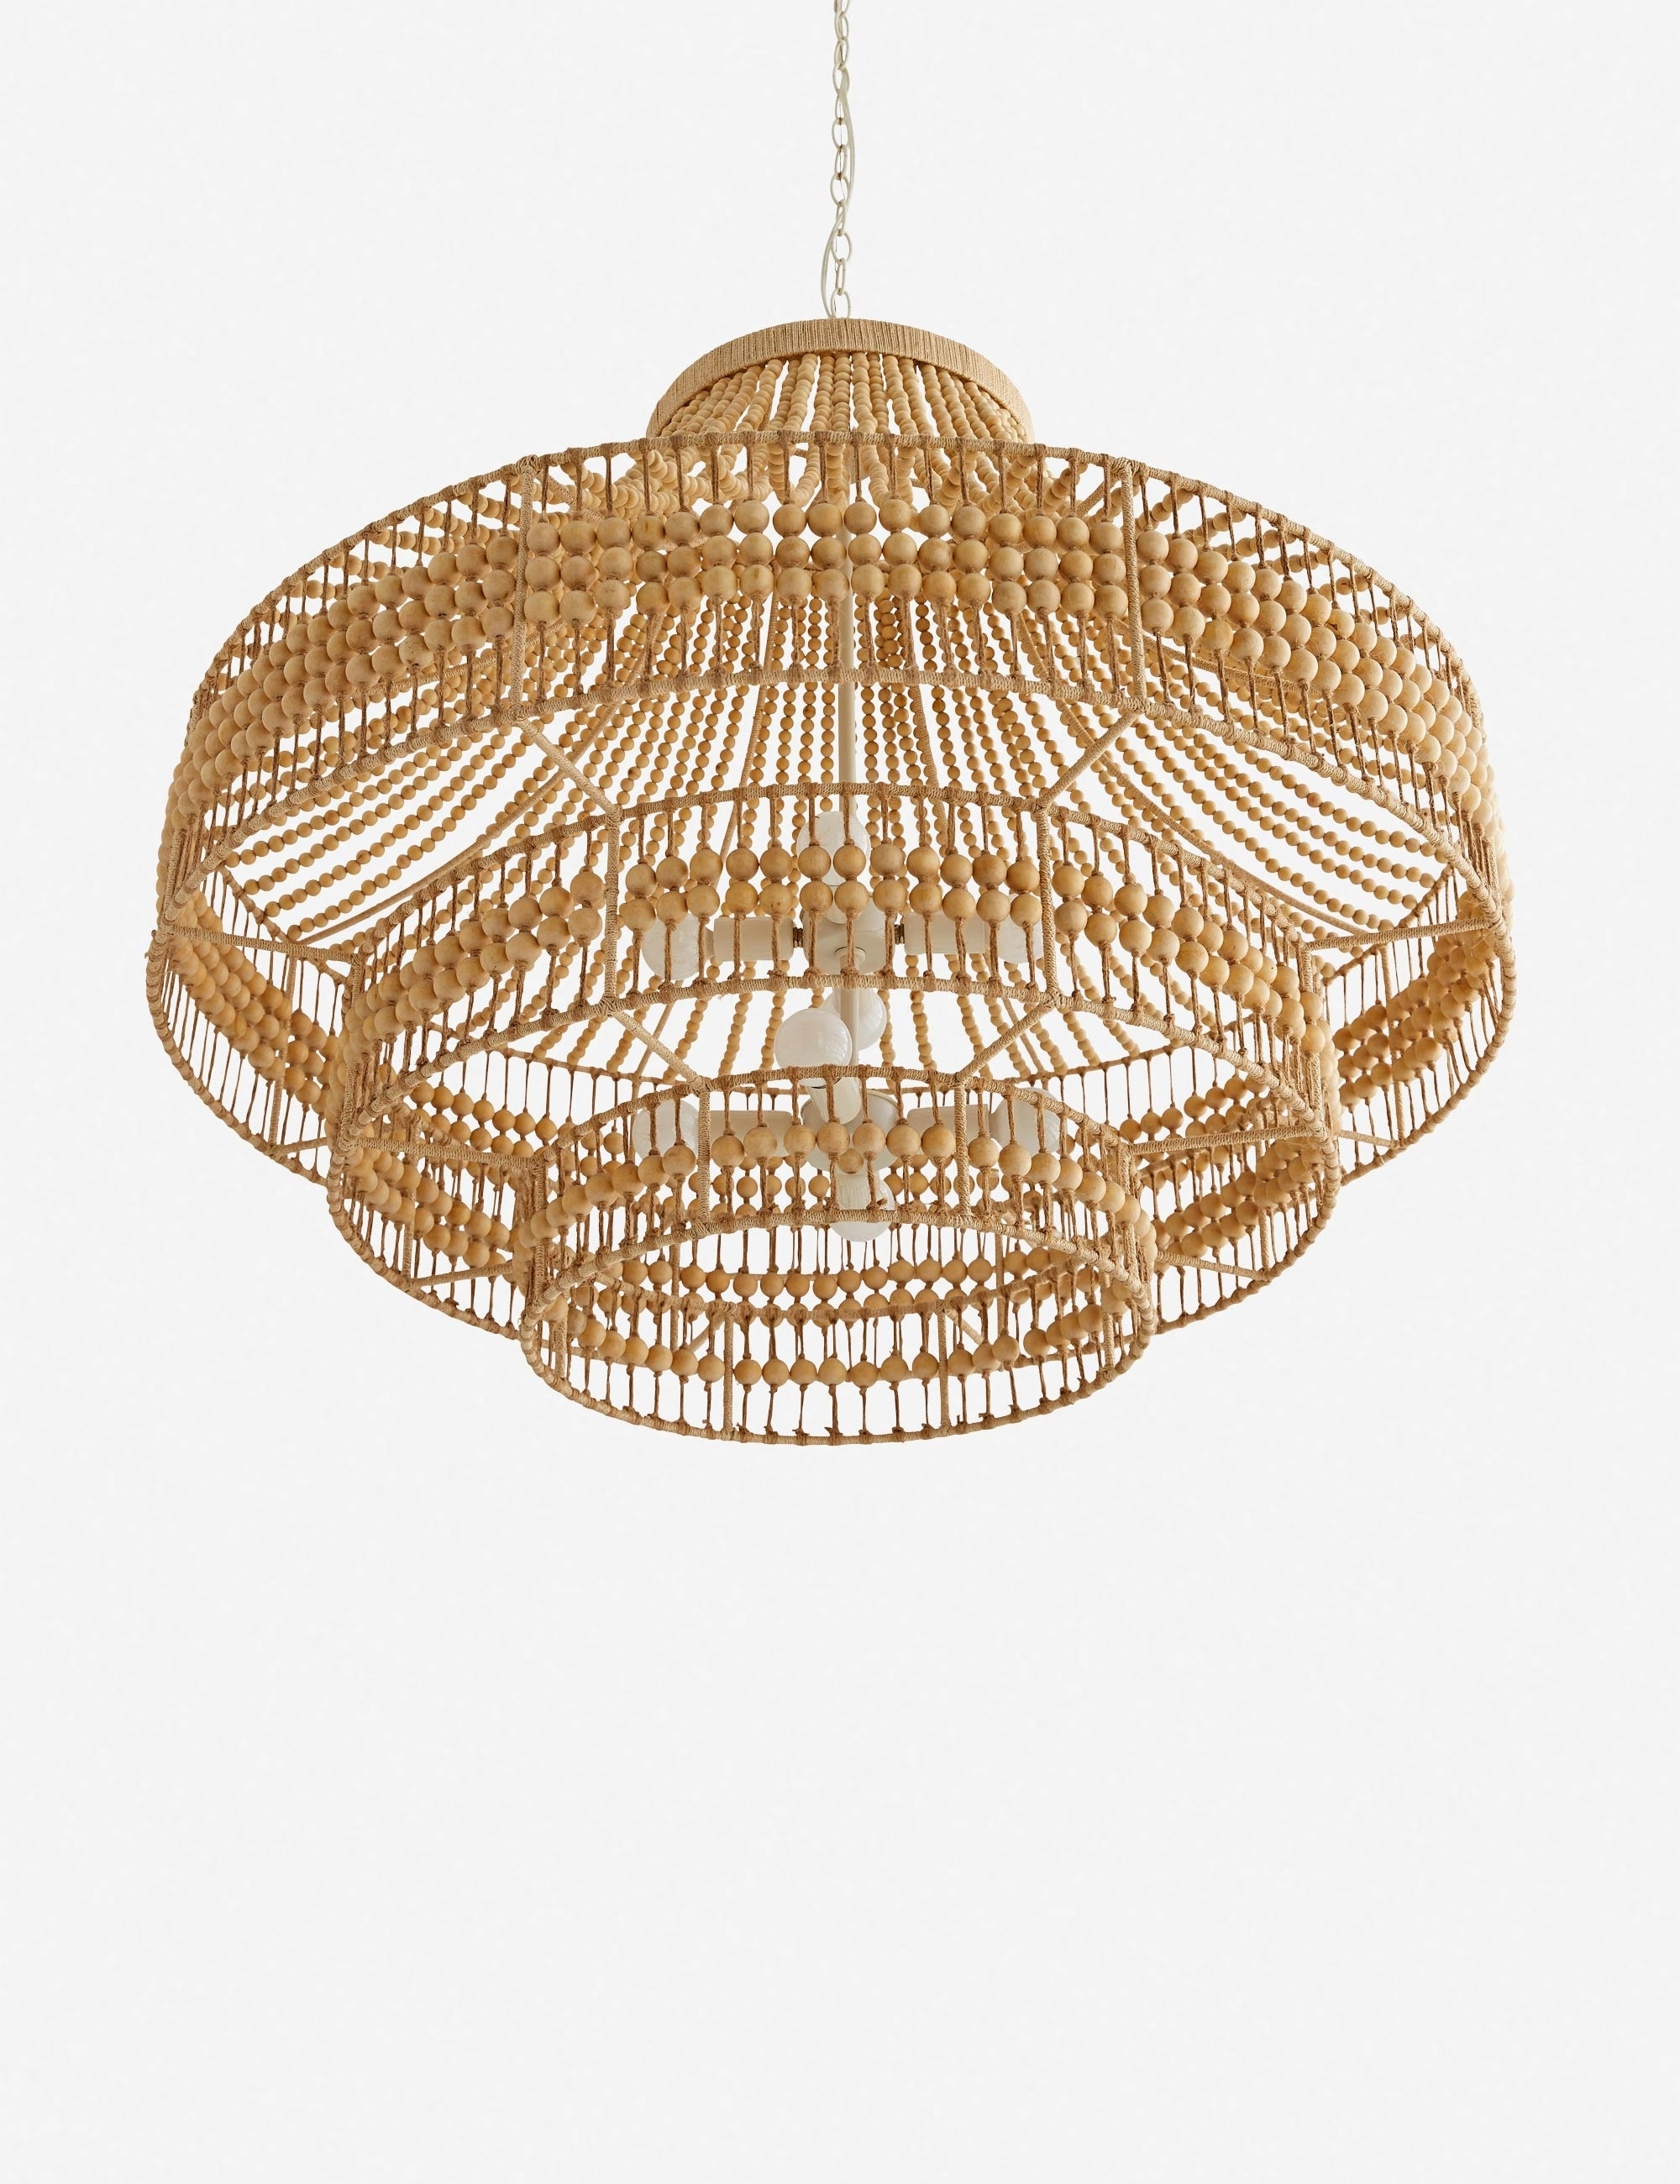 Tulane Chandelier by Arteriors - Image 7